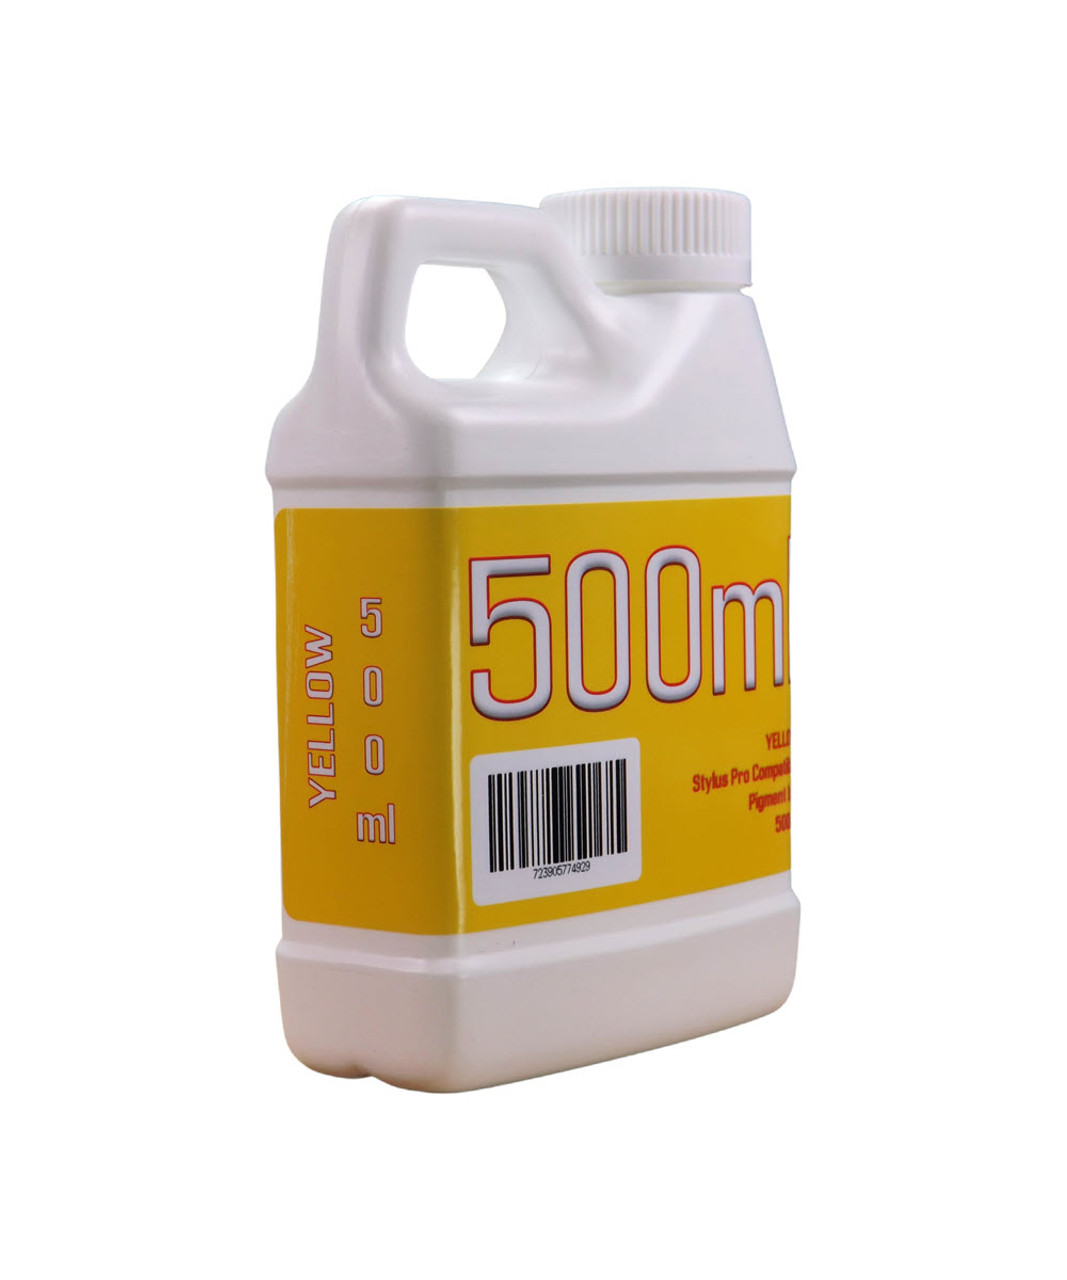 Yellow 500ml Bottle Compatible UltraChrome HDR Pigment Ink Epson Stylus Pro 7890 9890 Printers